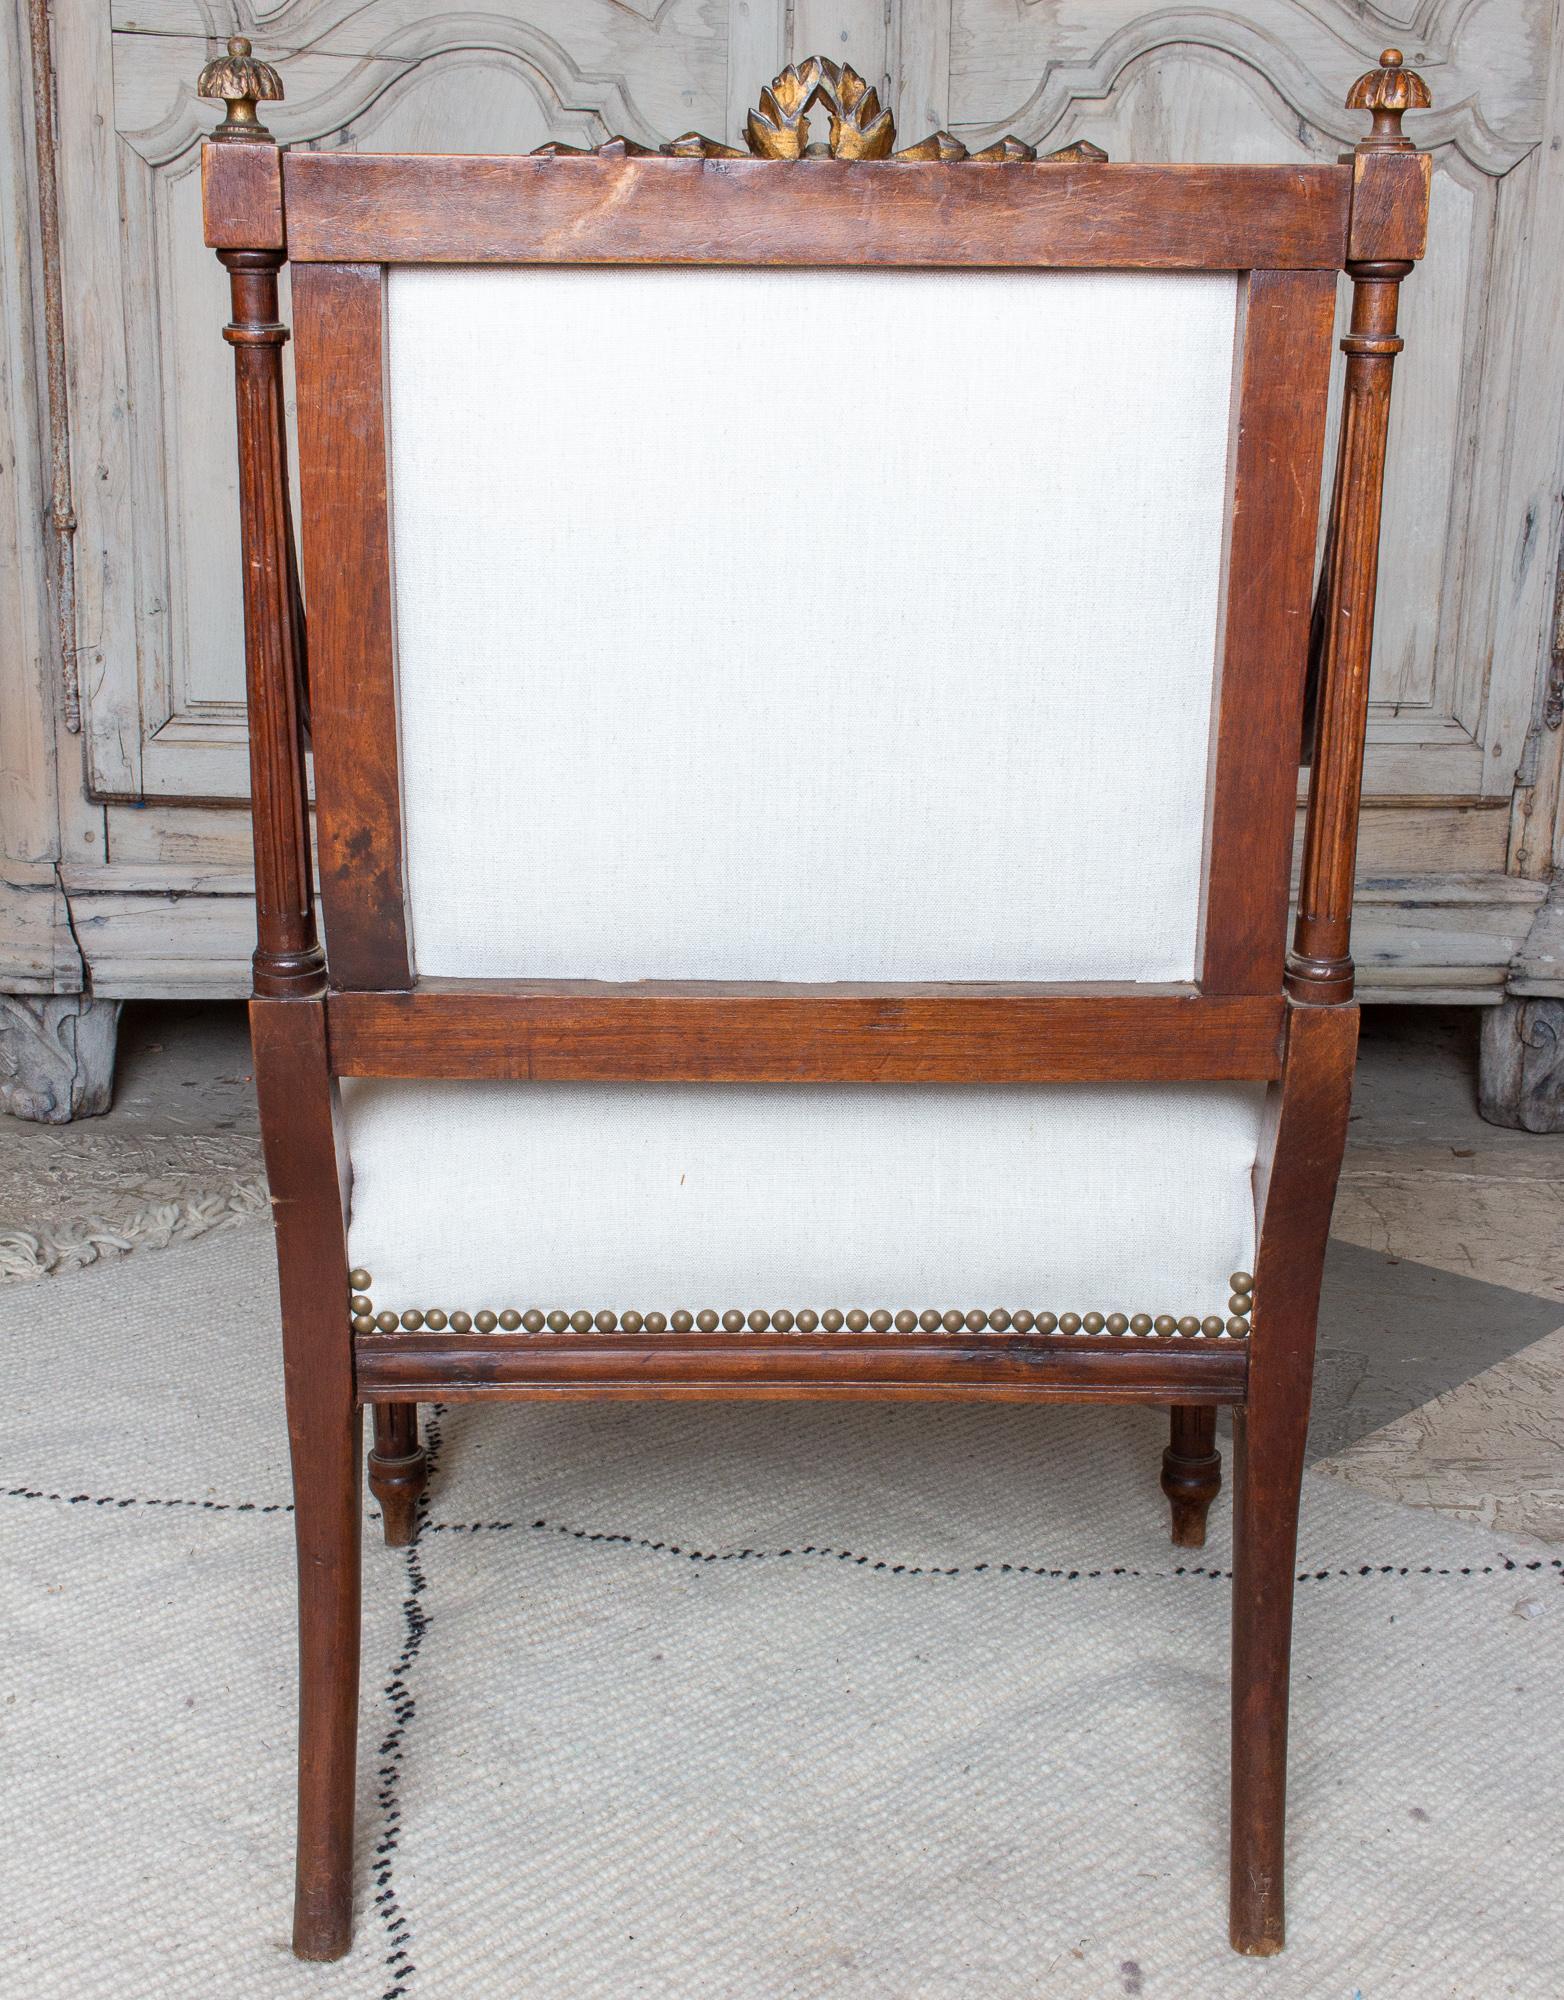 Mahogany Antique French Hand-Carved Louis XVI Armchairs with Gilt Details in Linen